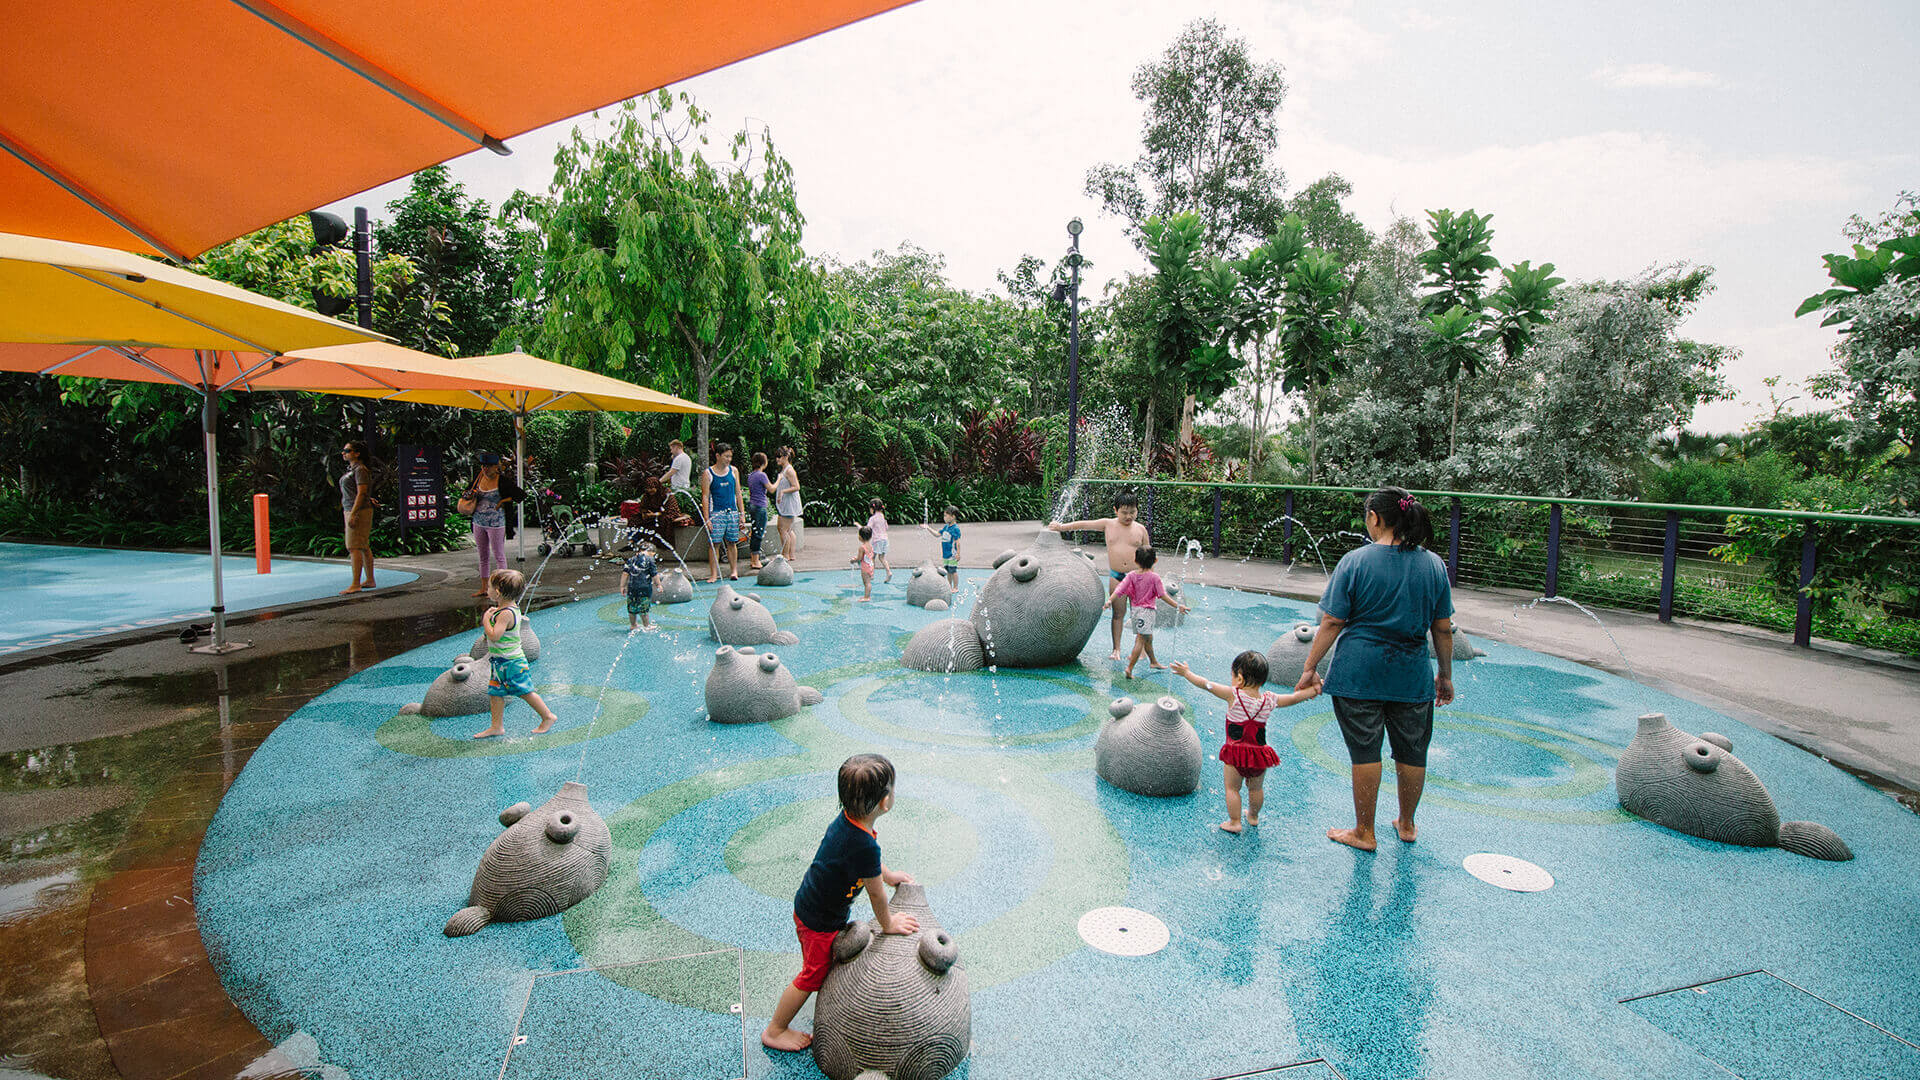 Free-to-enter Children's Garden at Gardens by the Bay, welcoming families from 9am to 7pm on select days.